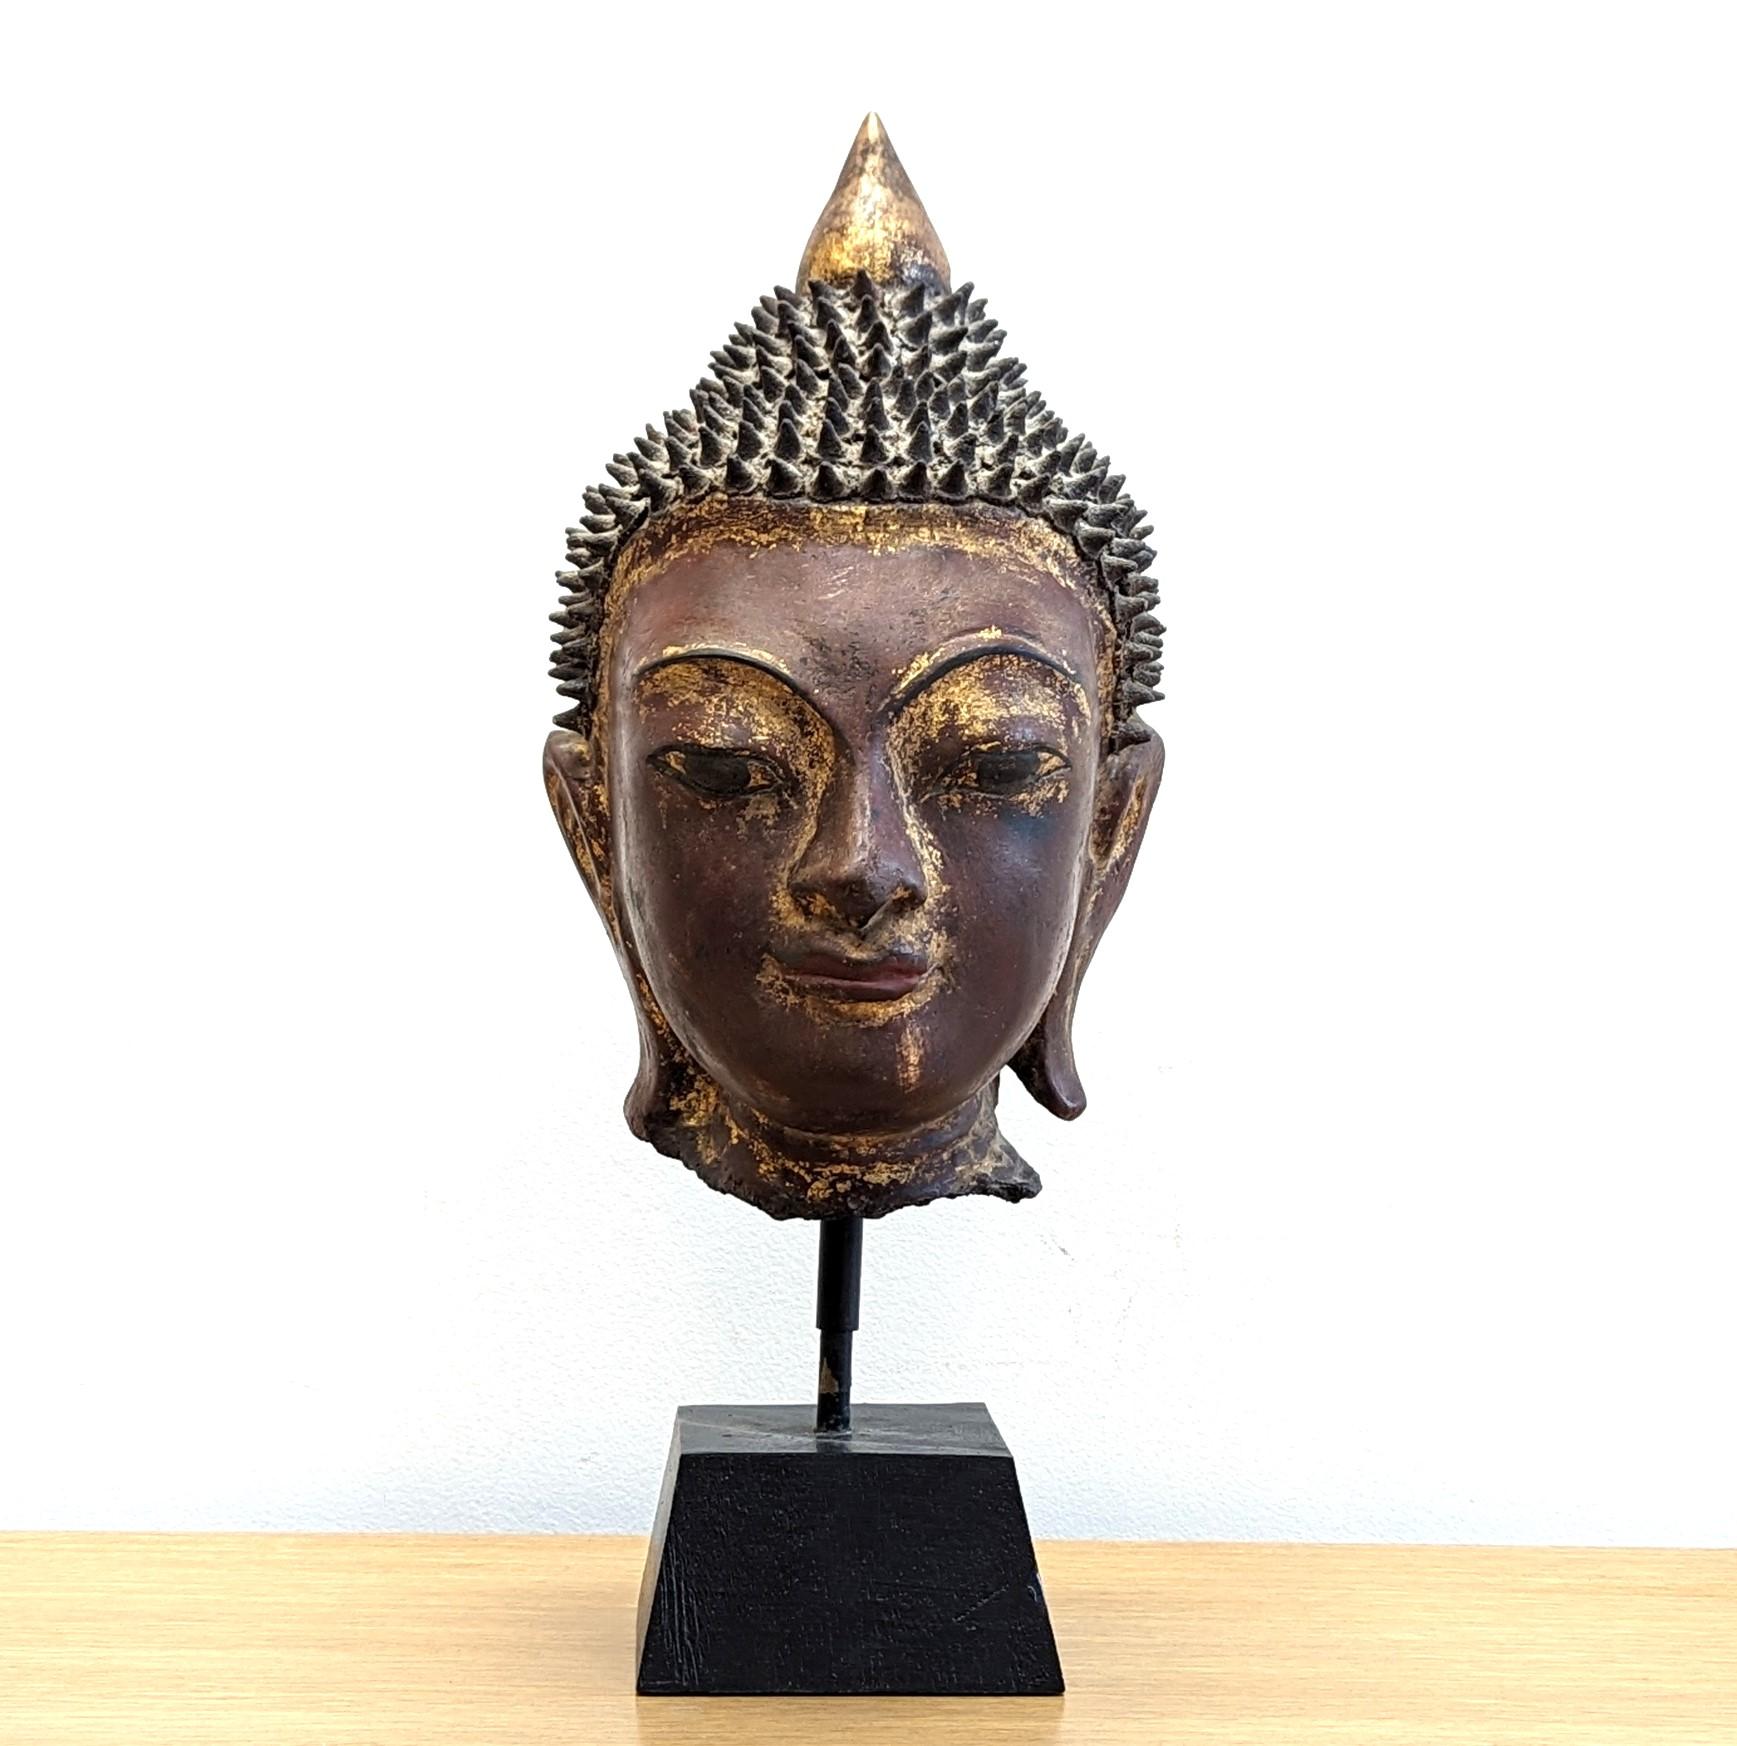 Burmese Buddha Sculpture.  A Dry Lacquer Buddha Head, late 19th early 20th century, Shan Period 1315 - 1948, composed of wood, wood ash, Thayo, dry lacquer with gilding set on wooden block.  Serene wonderful example of Burmese Shan Period Buddhist